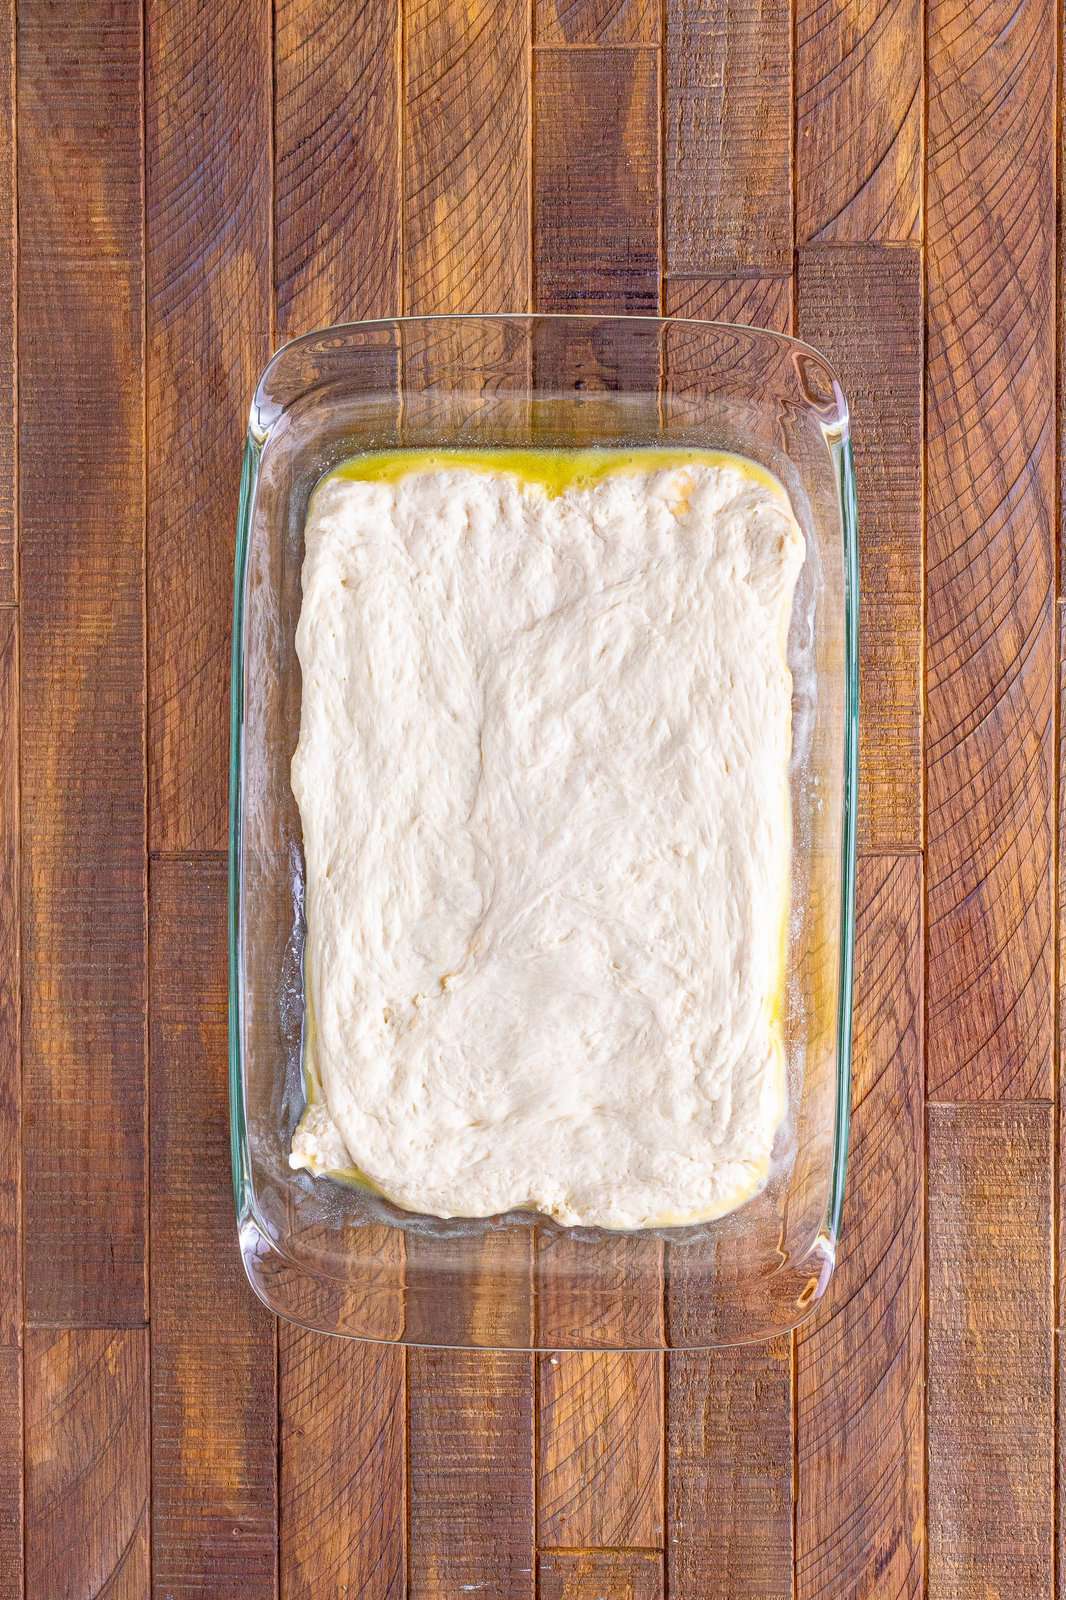 Pizza dough spread over butter in baking dish.